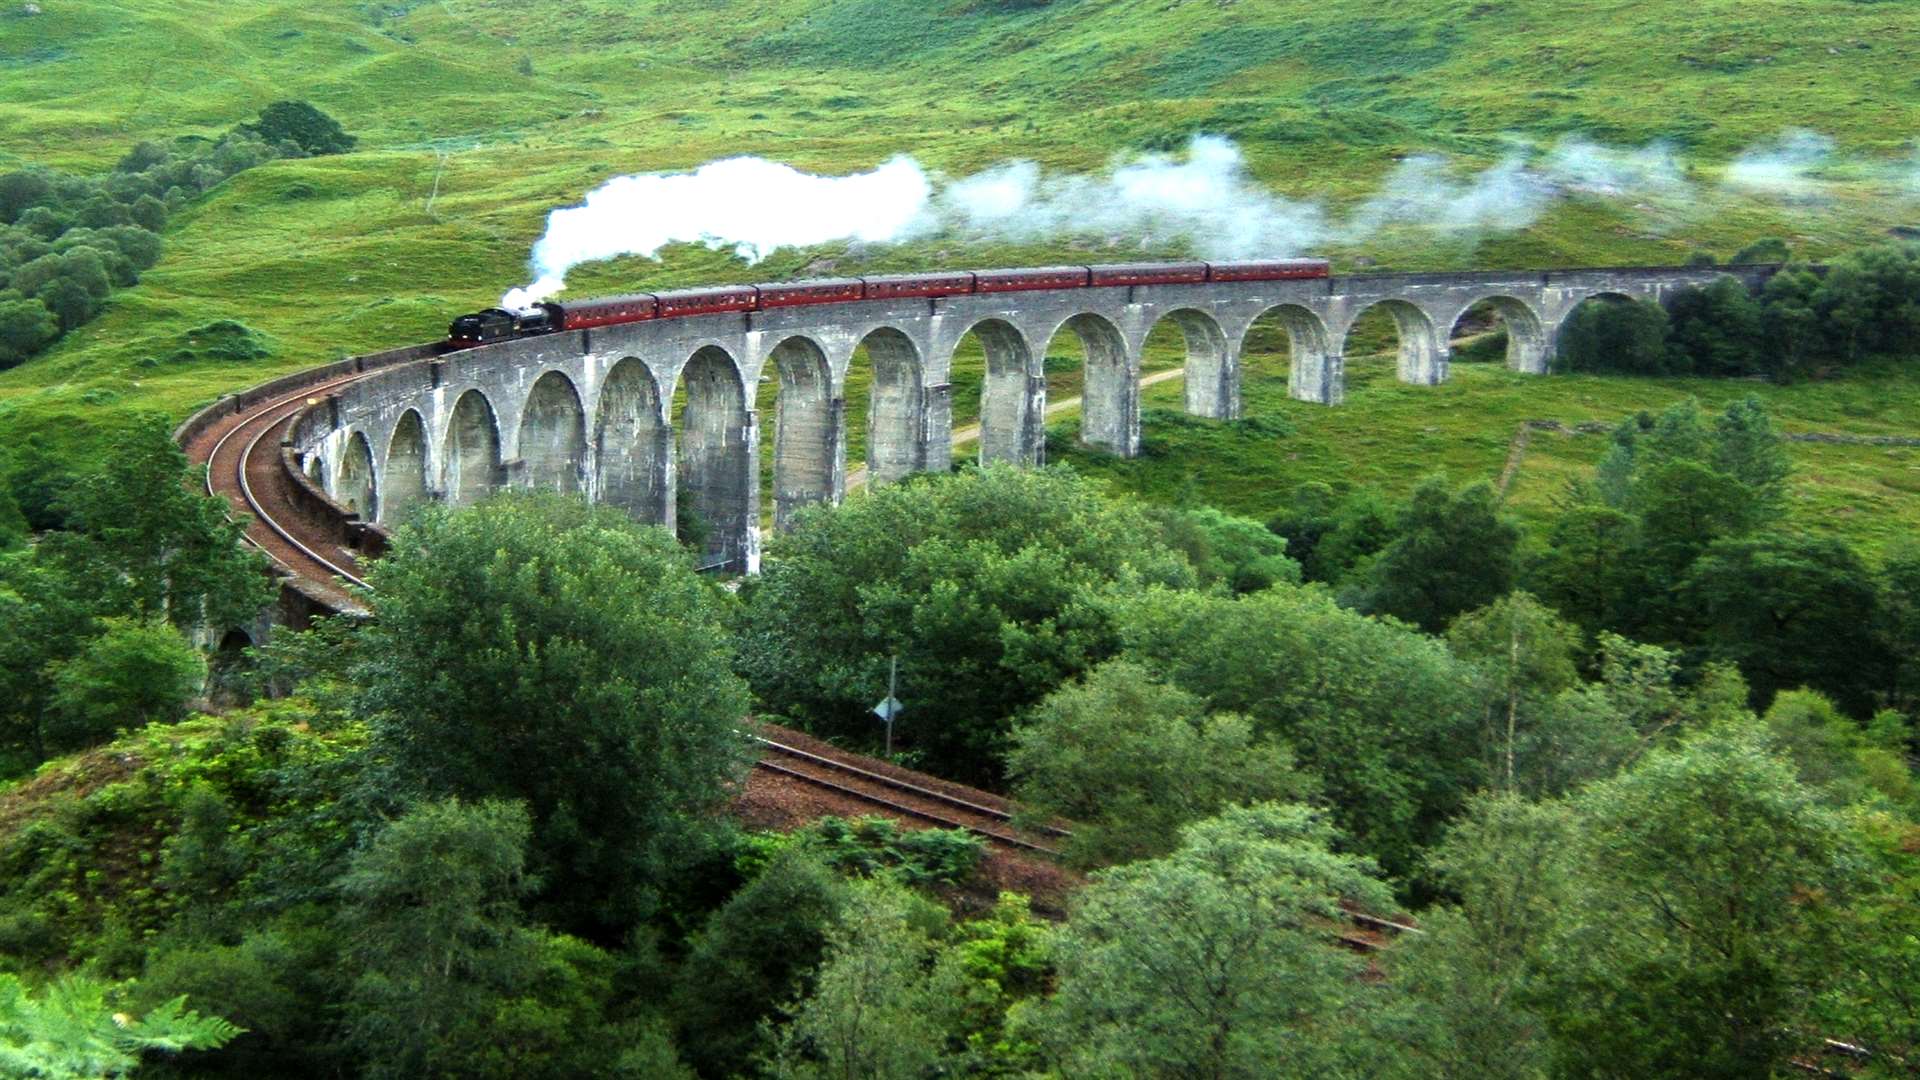 The Glenfinnan Viaduct, made famous in the Harry Potter films